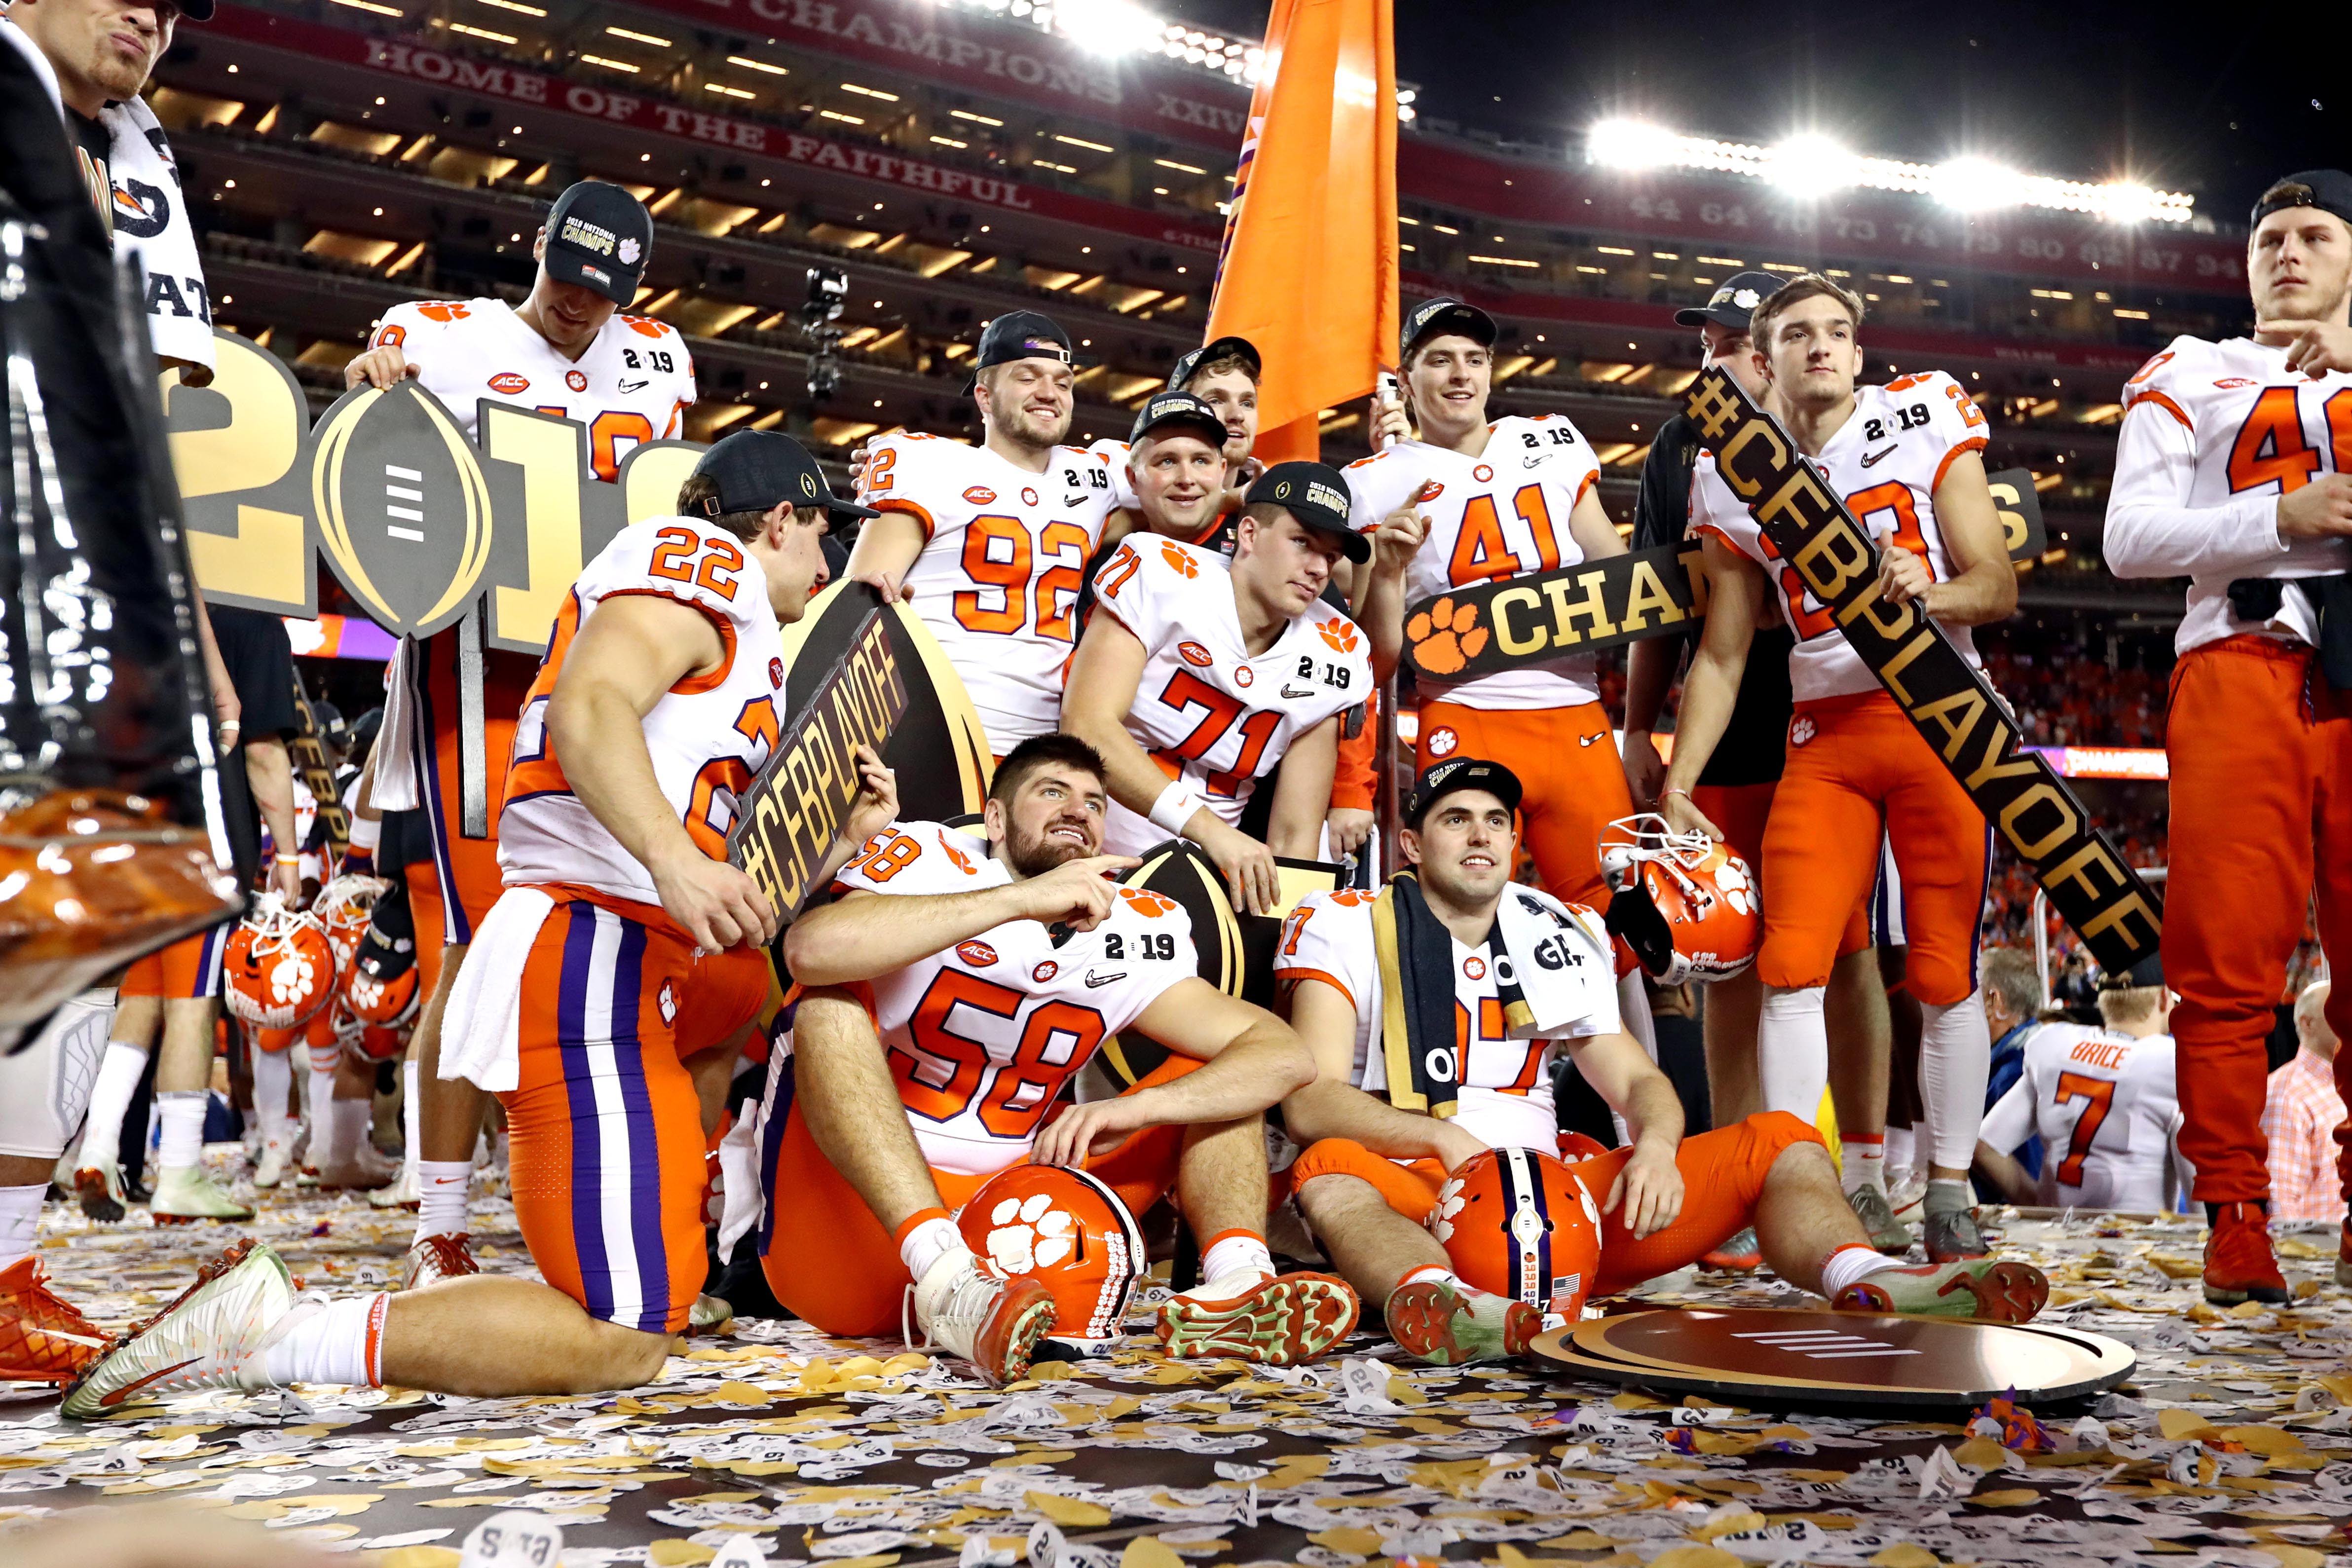 Why Clemson Is An Obvious Lock To Return To The Championship